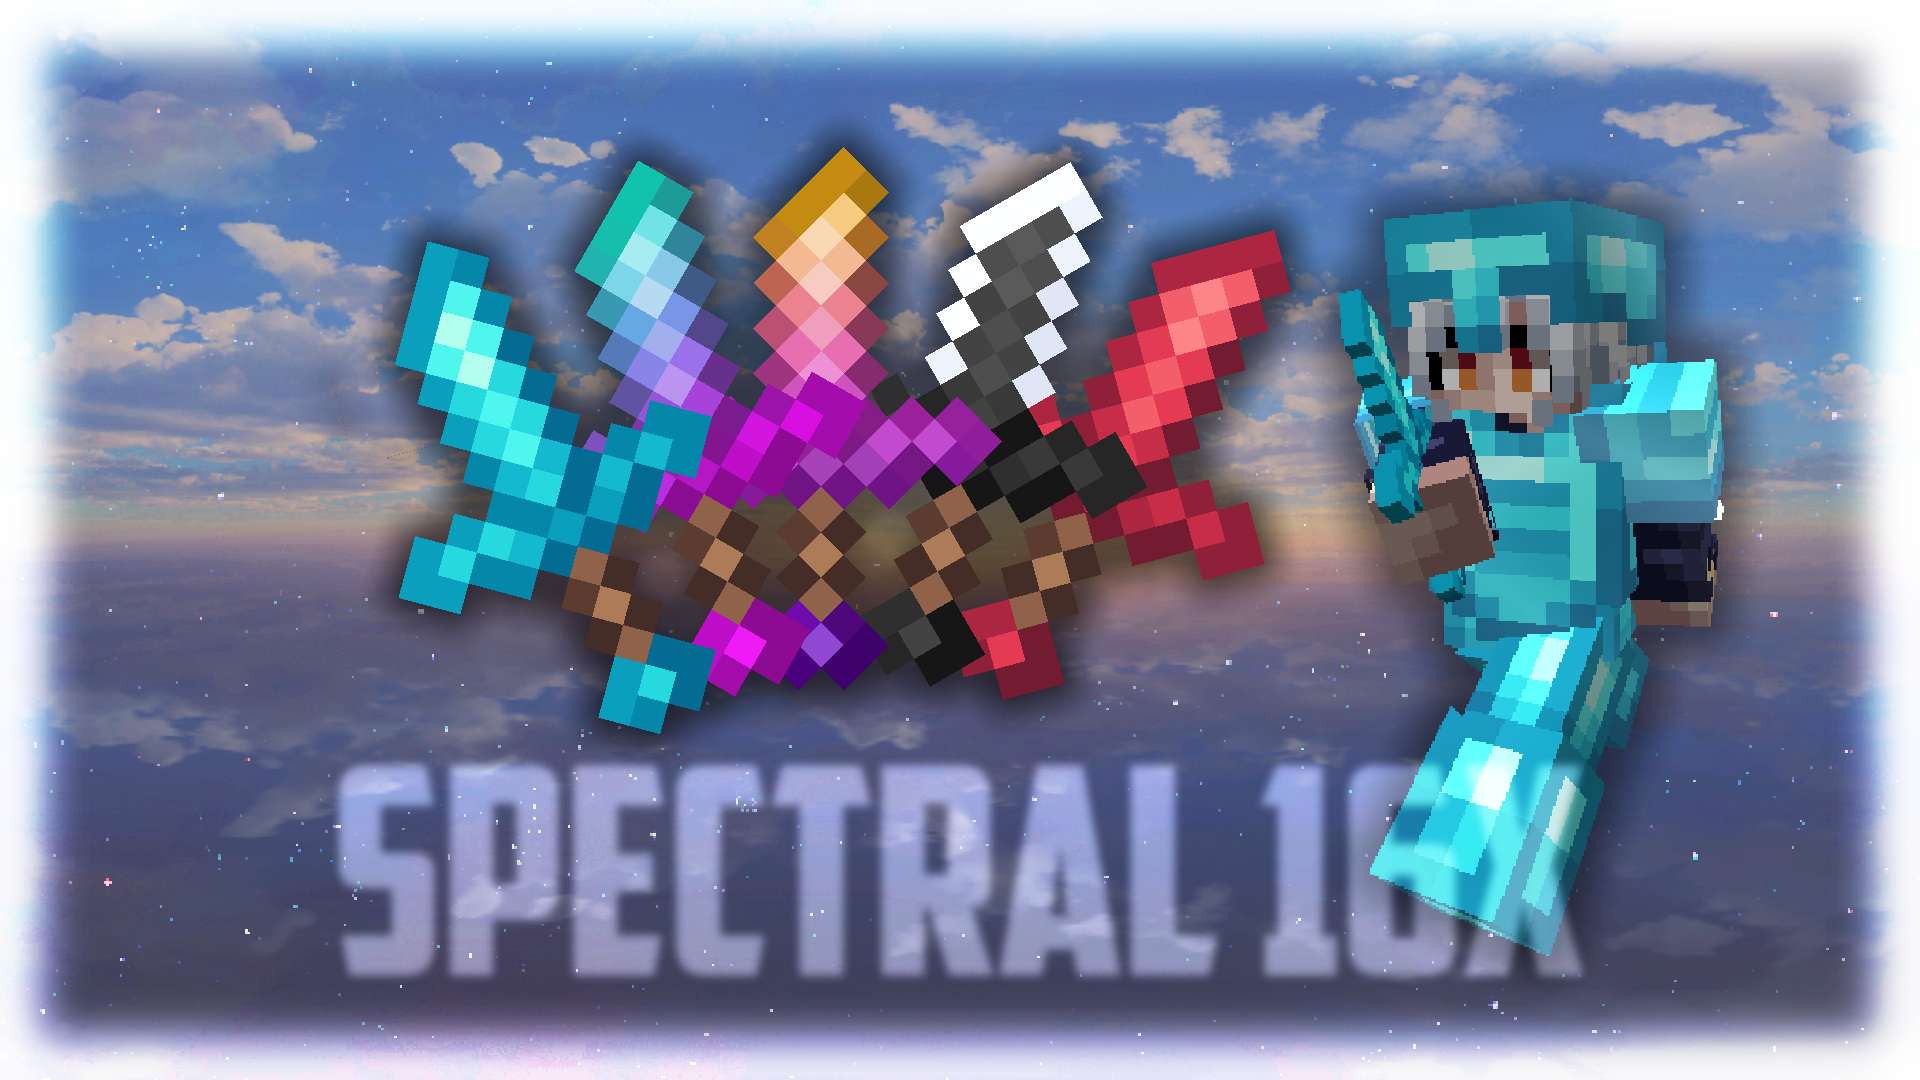 Spectral - Teal 16 by Zlax on PvPRP